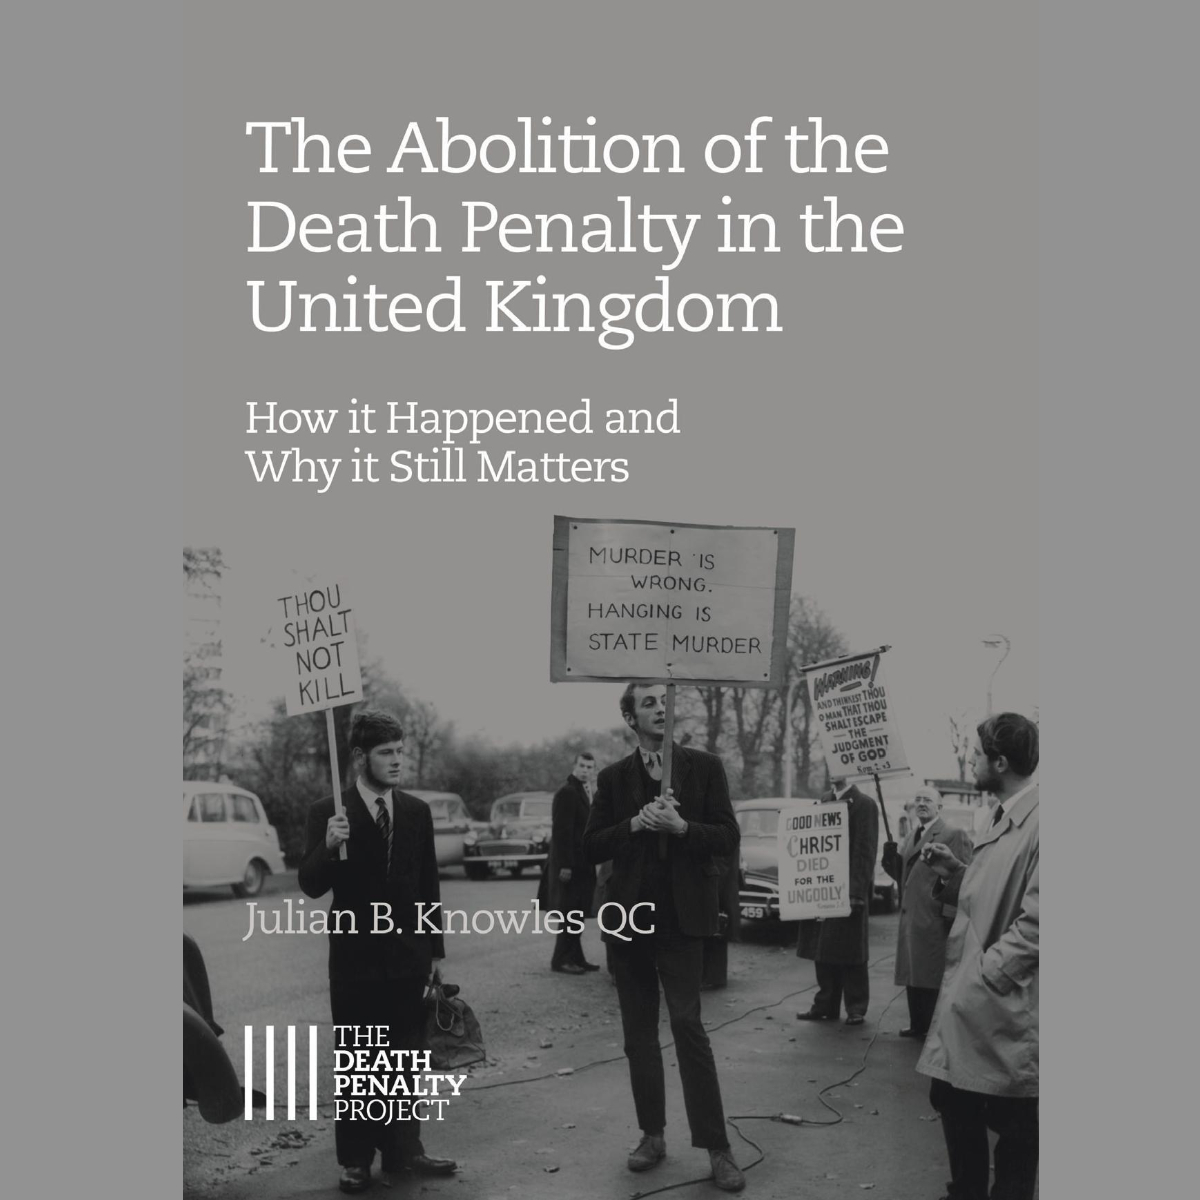 why was the death penalty abolished in the uk essay